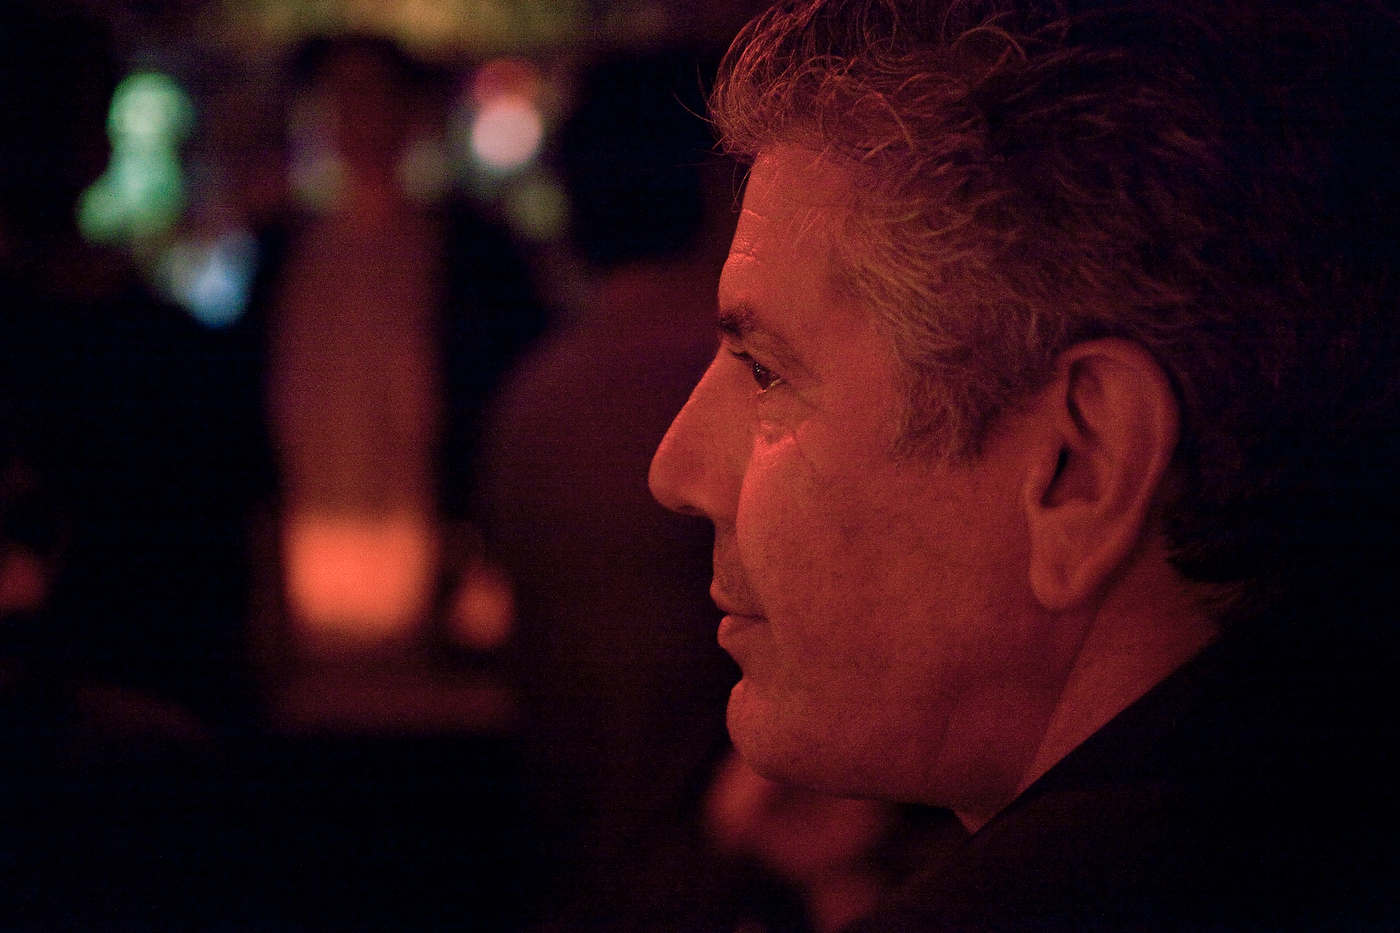 Anthony Bourdain, The Travel Channel.